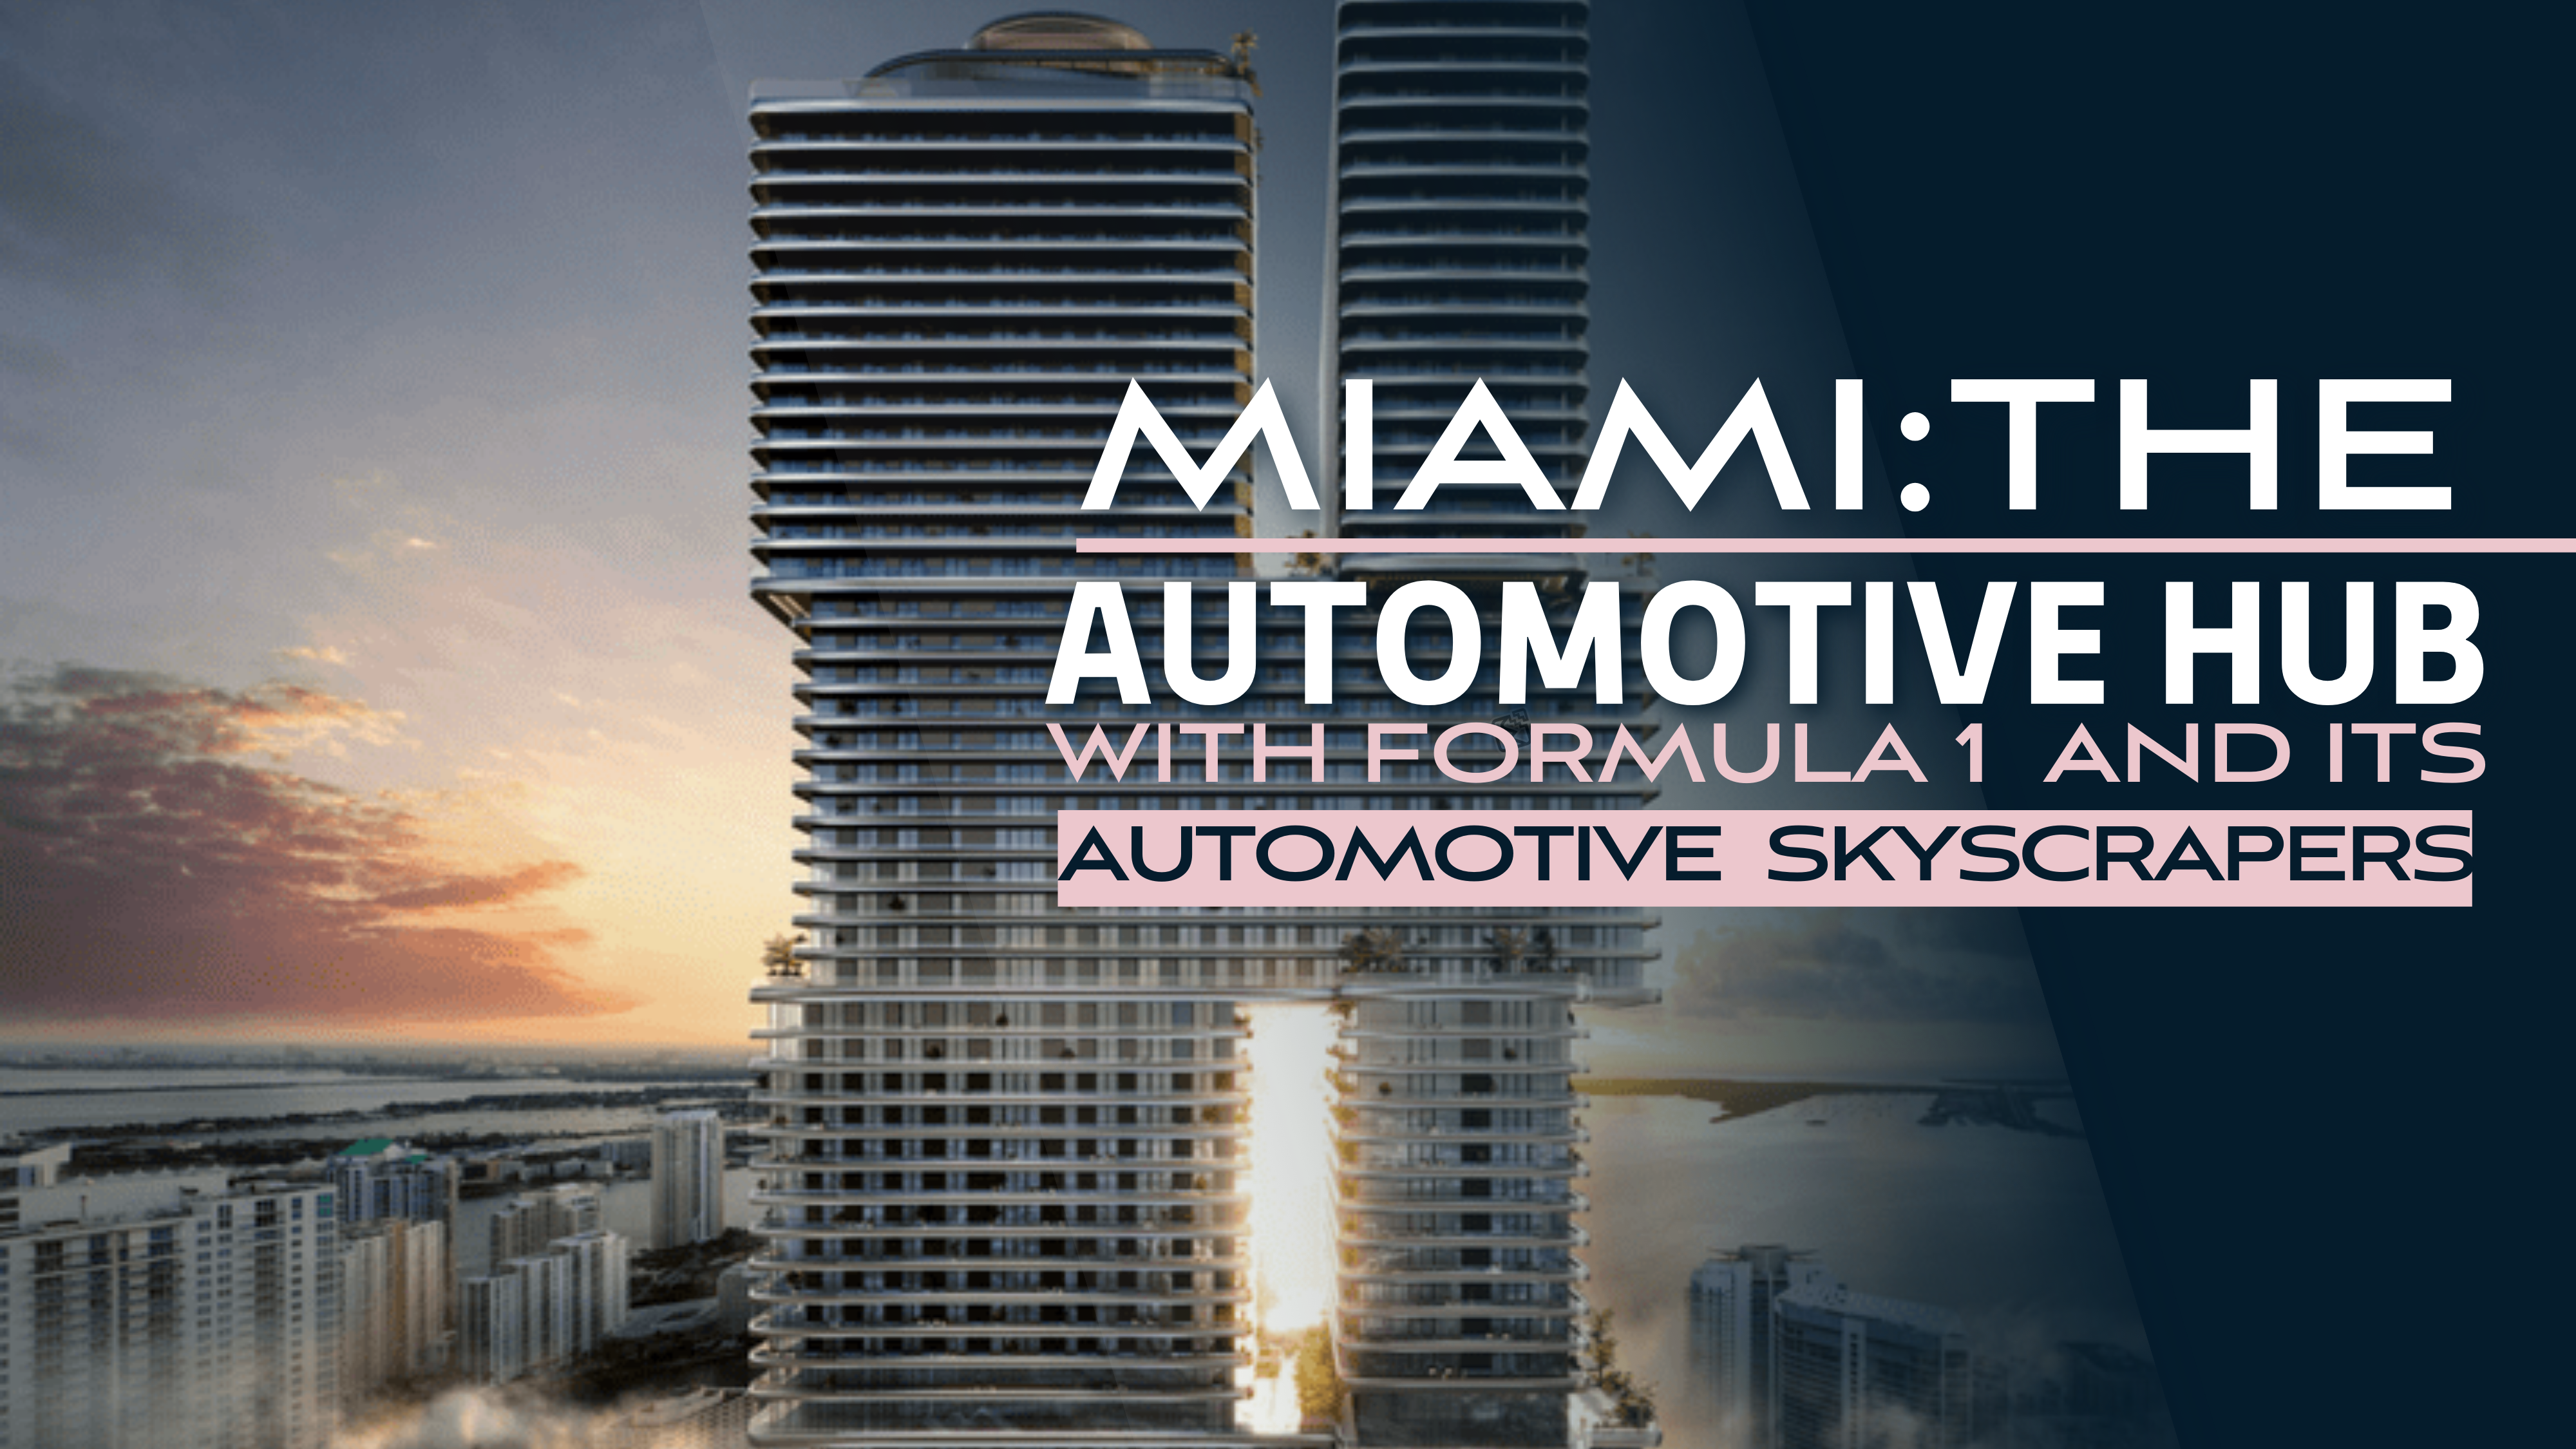 Miami: The Automotive Hub with Formula 1 and its Automotive Brand Skyscrapers